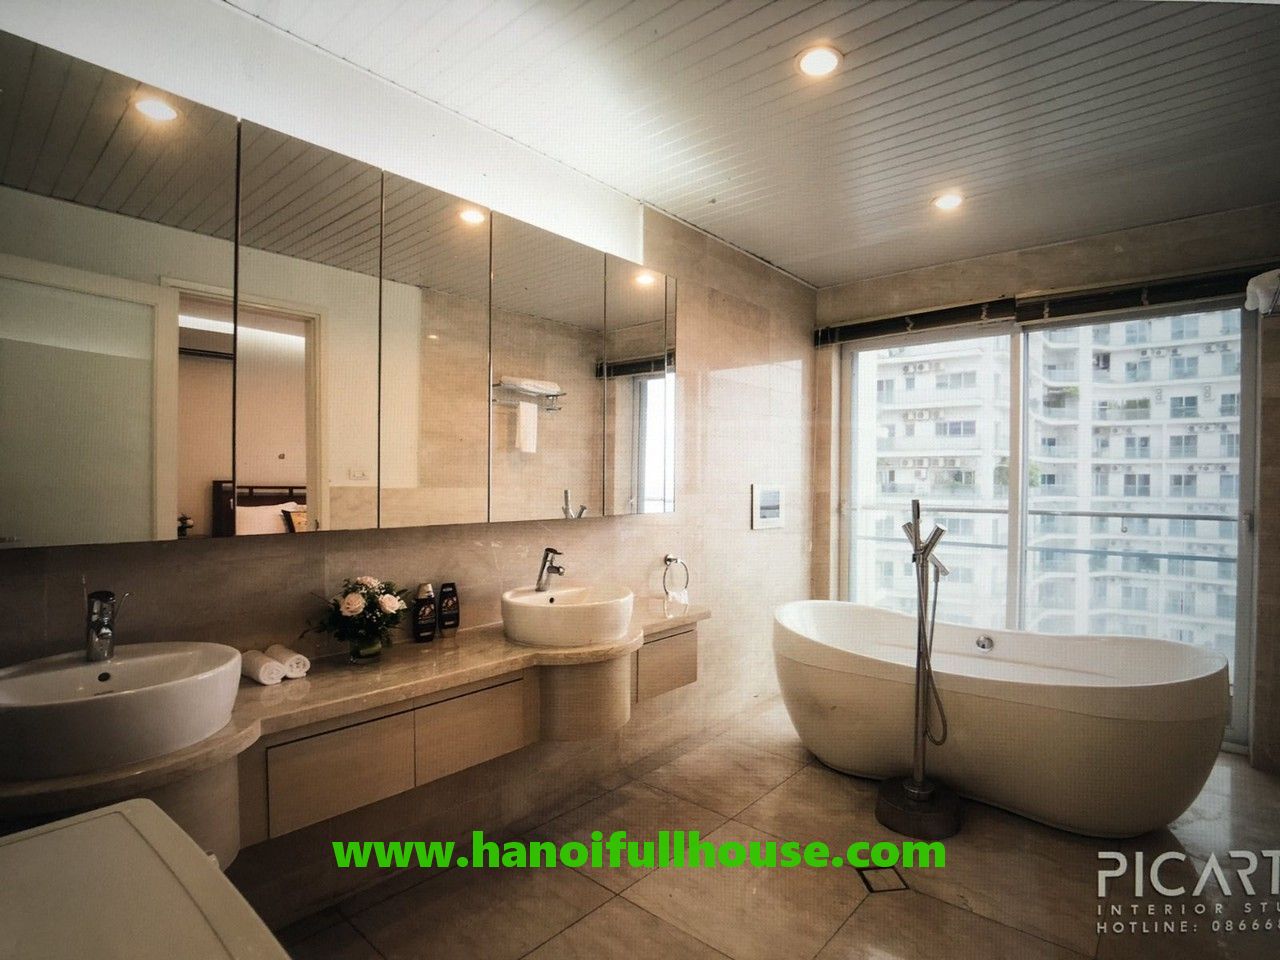 Luxury & modern 4-bedroom apartment near the center, overlooking West Lake,